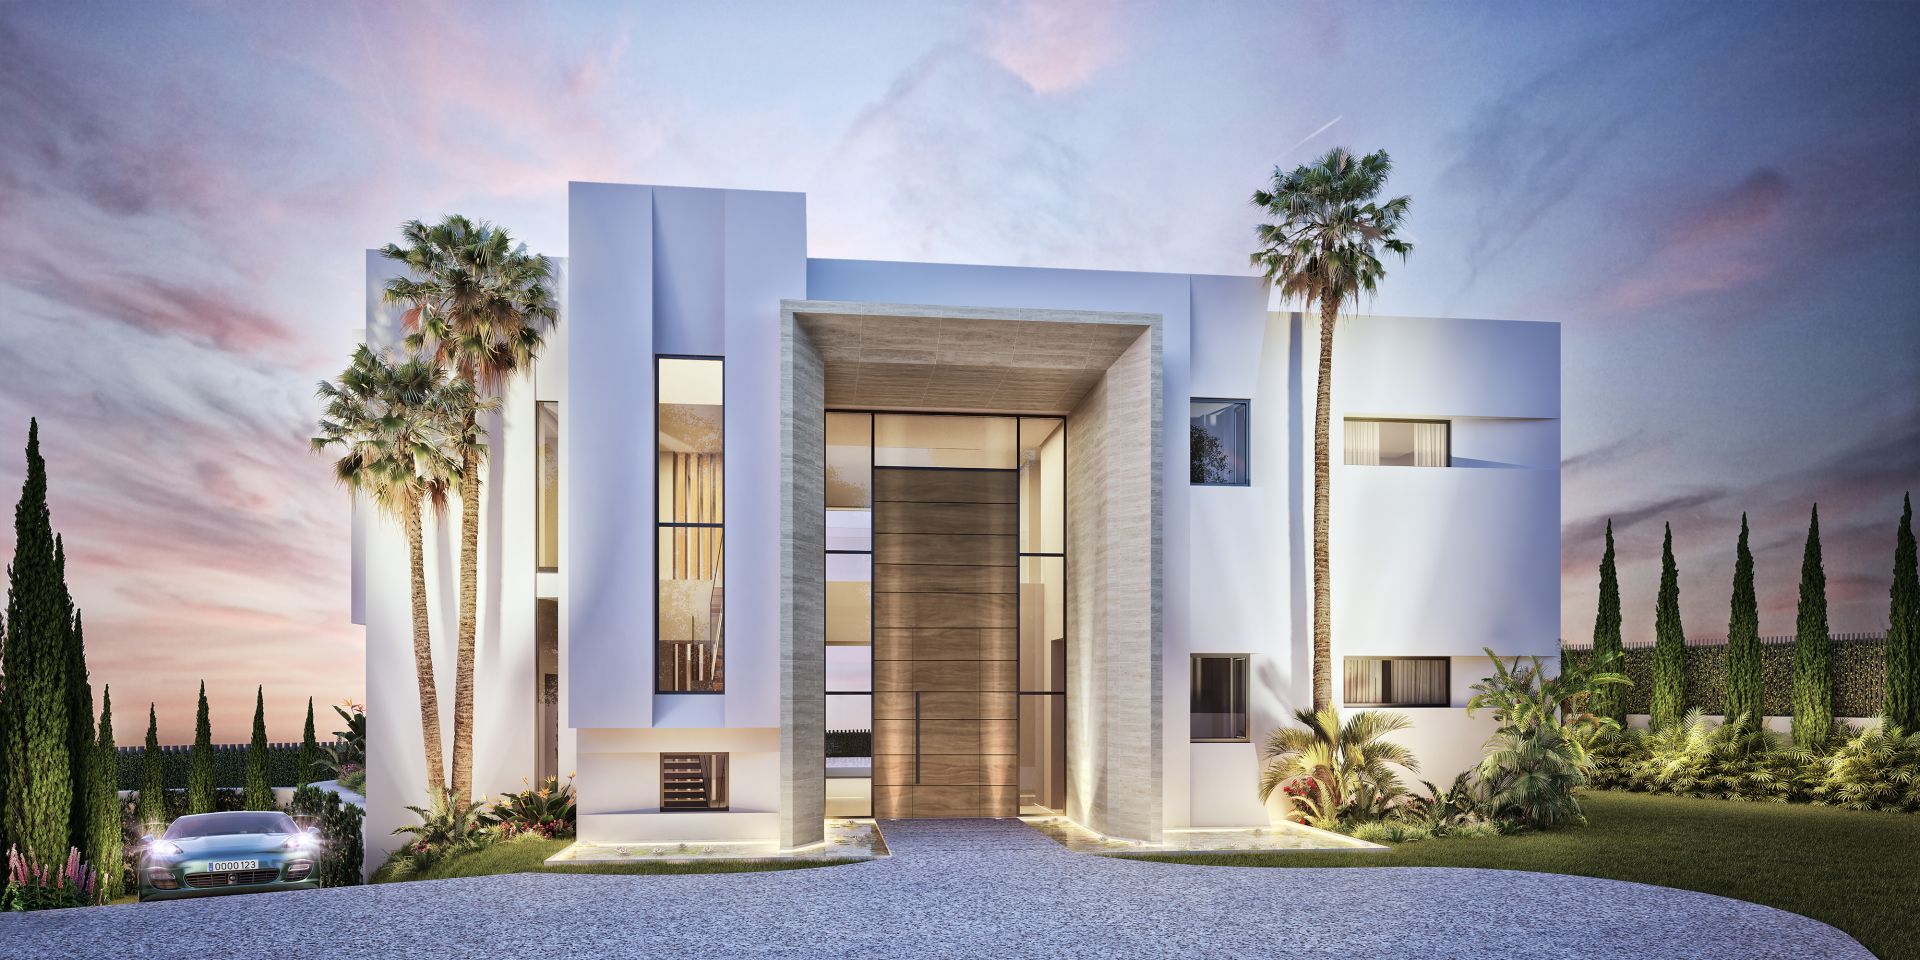 The Gallery by Minotti Marbella – An exceptional new gated community of luxury villas with 5* star resort amenities | Engel & Völkers Marbella